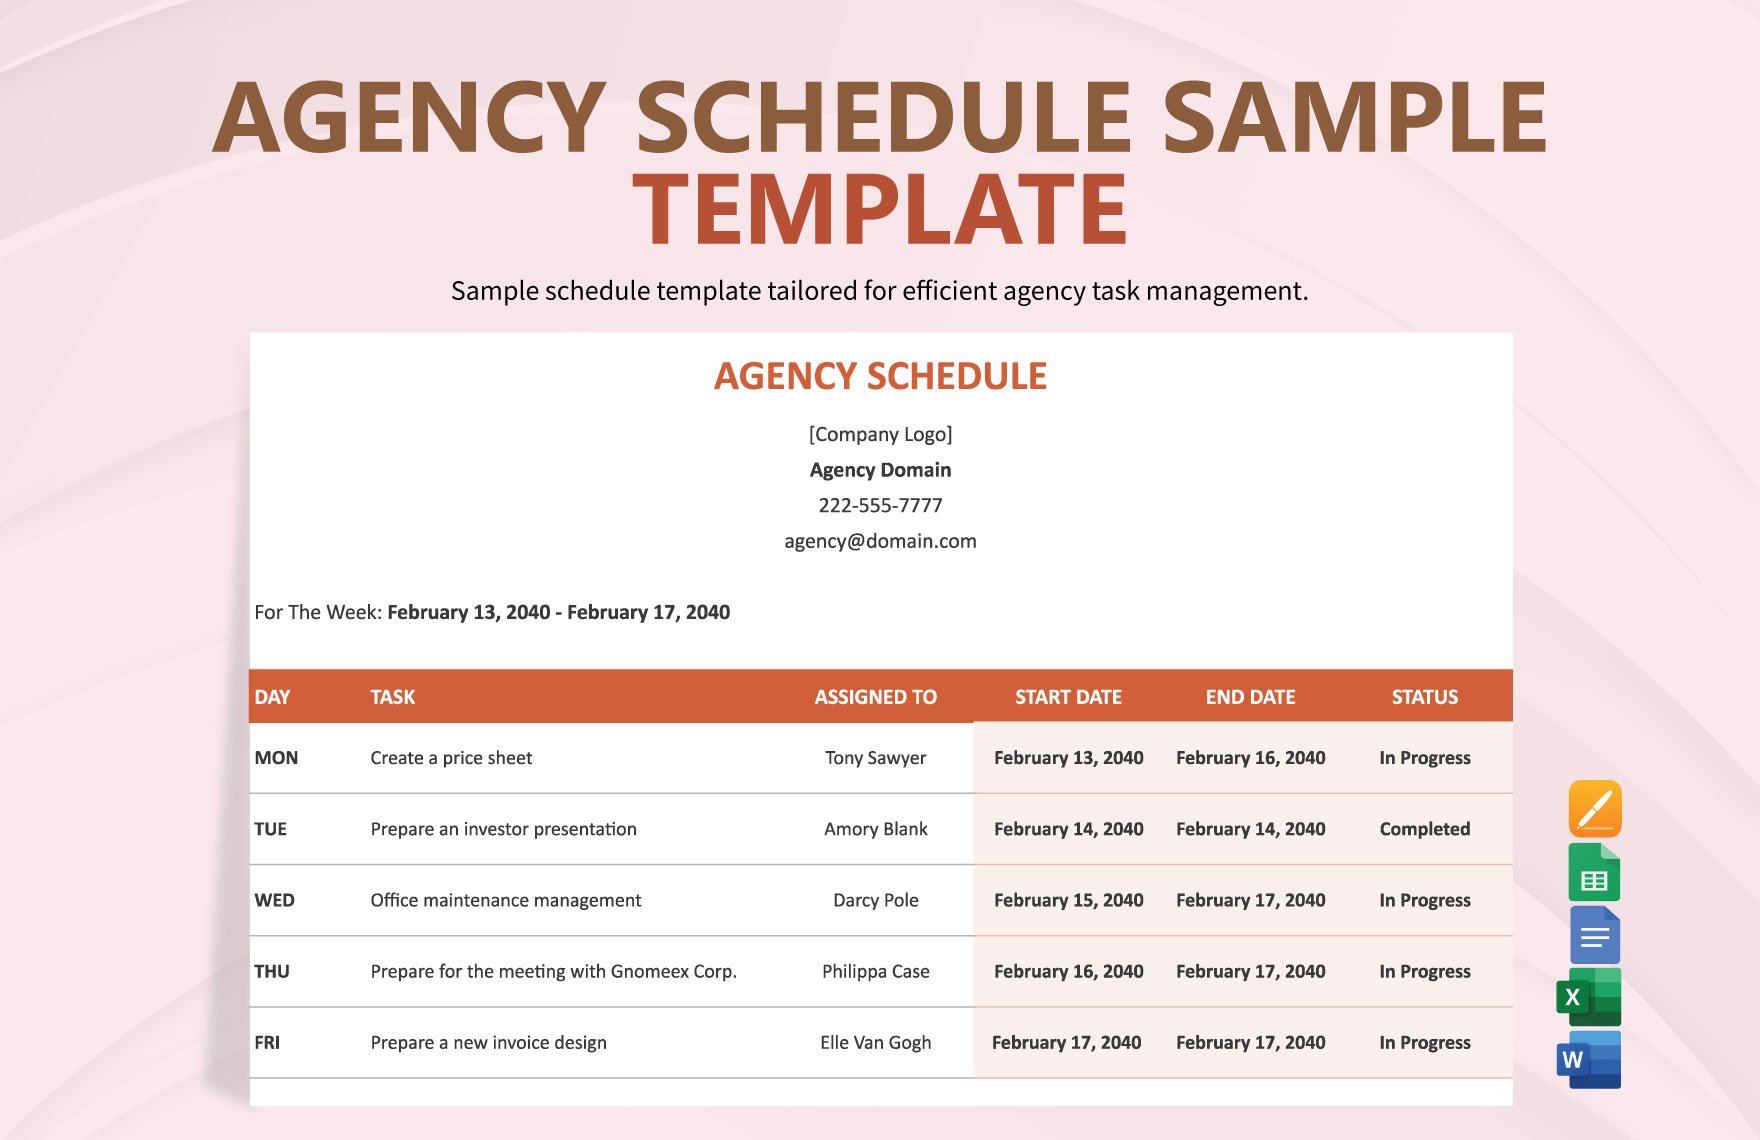 Agency Schedule Sample Template in Word, Google Docs, Excel, Google Sheets, Apple Pages